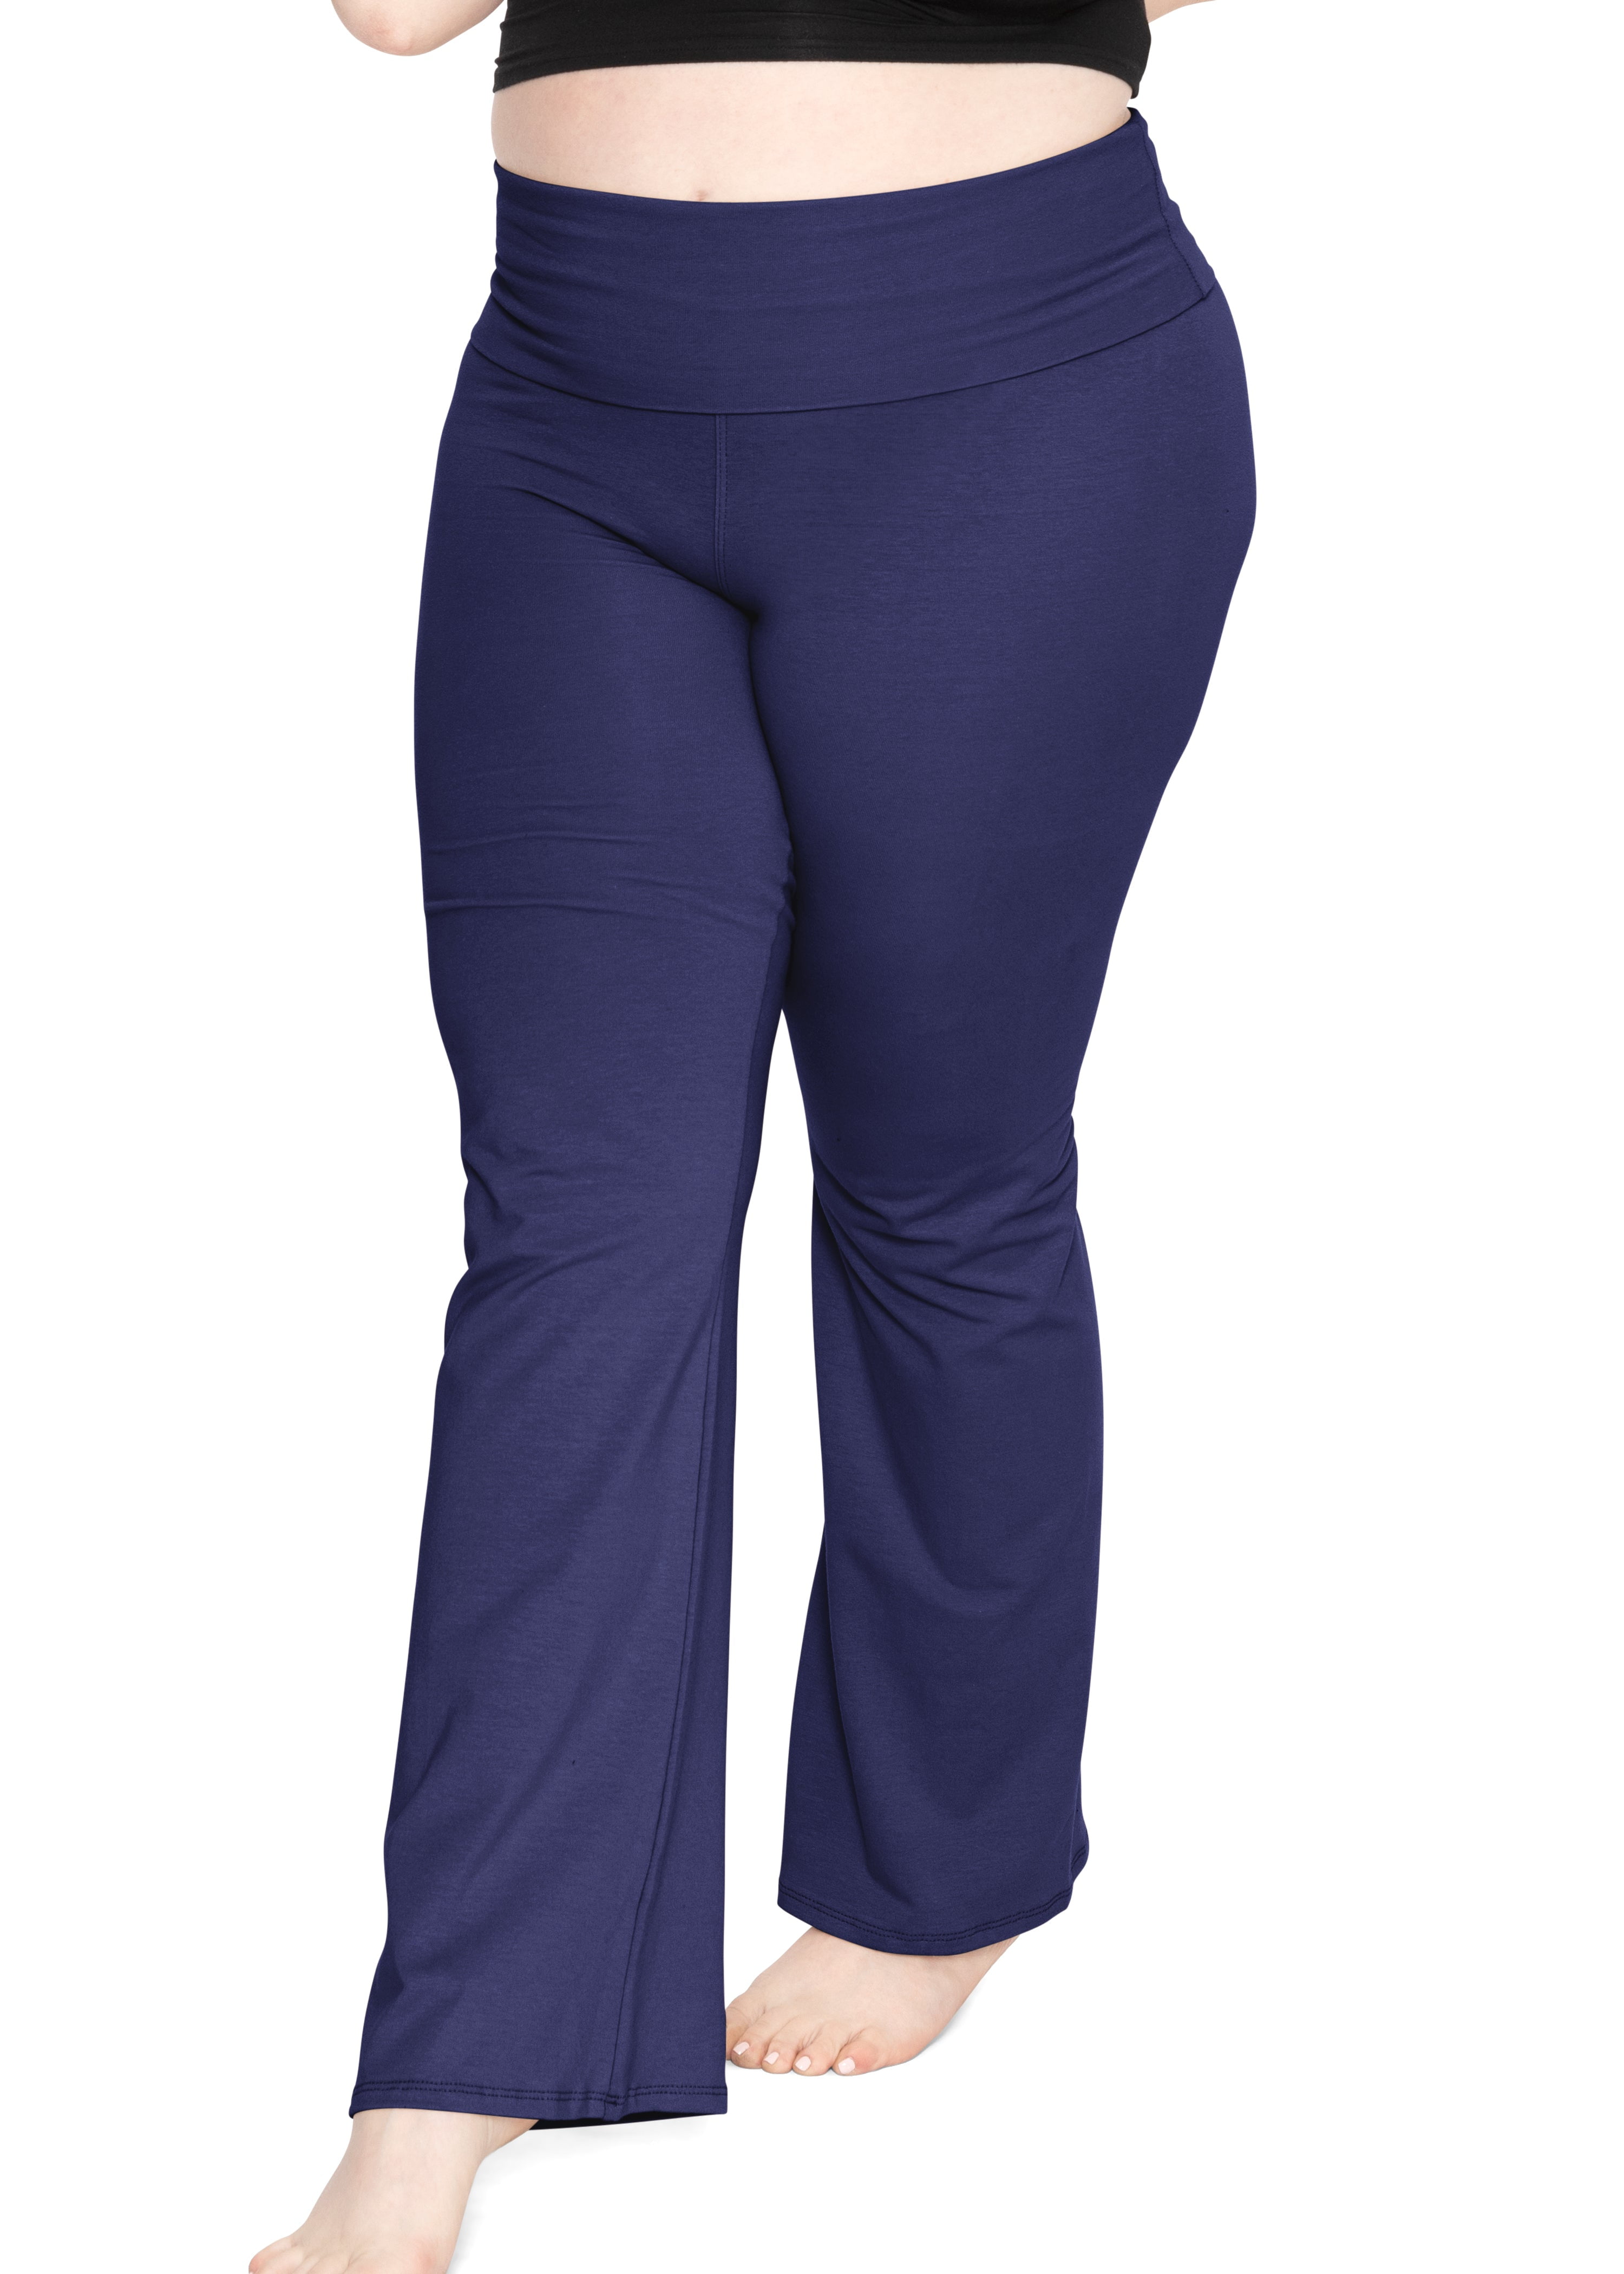 Stretch is Comfort Women's Foldover Yoga Pant | Adult Small -7x